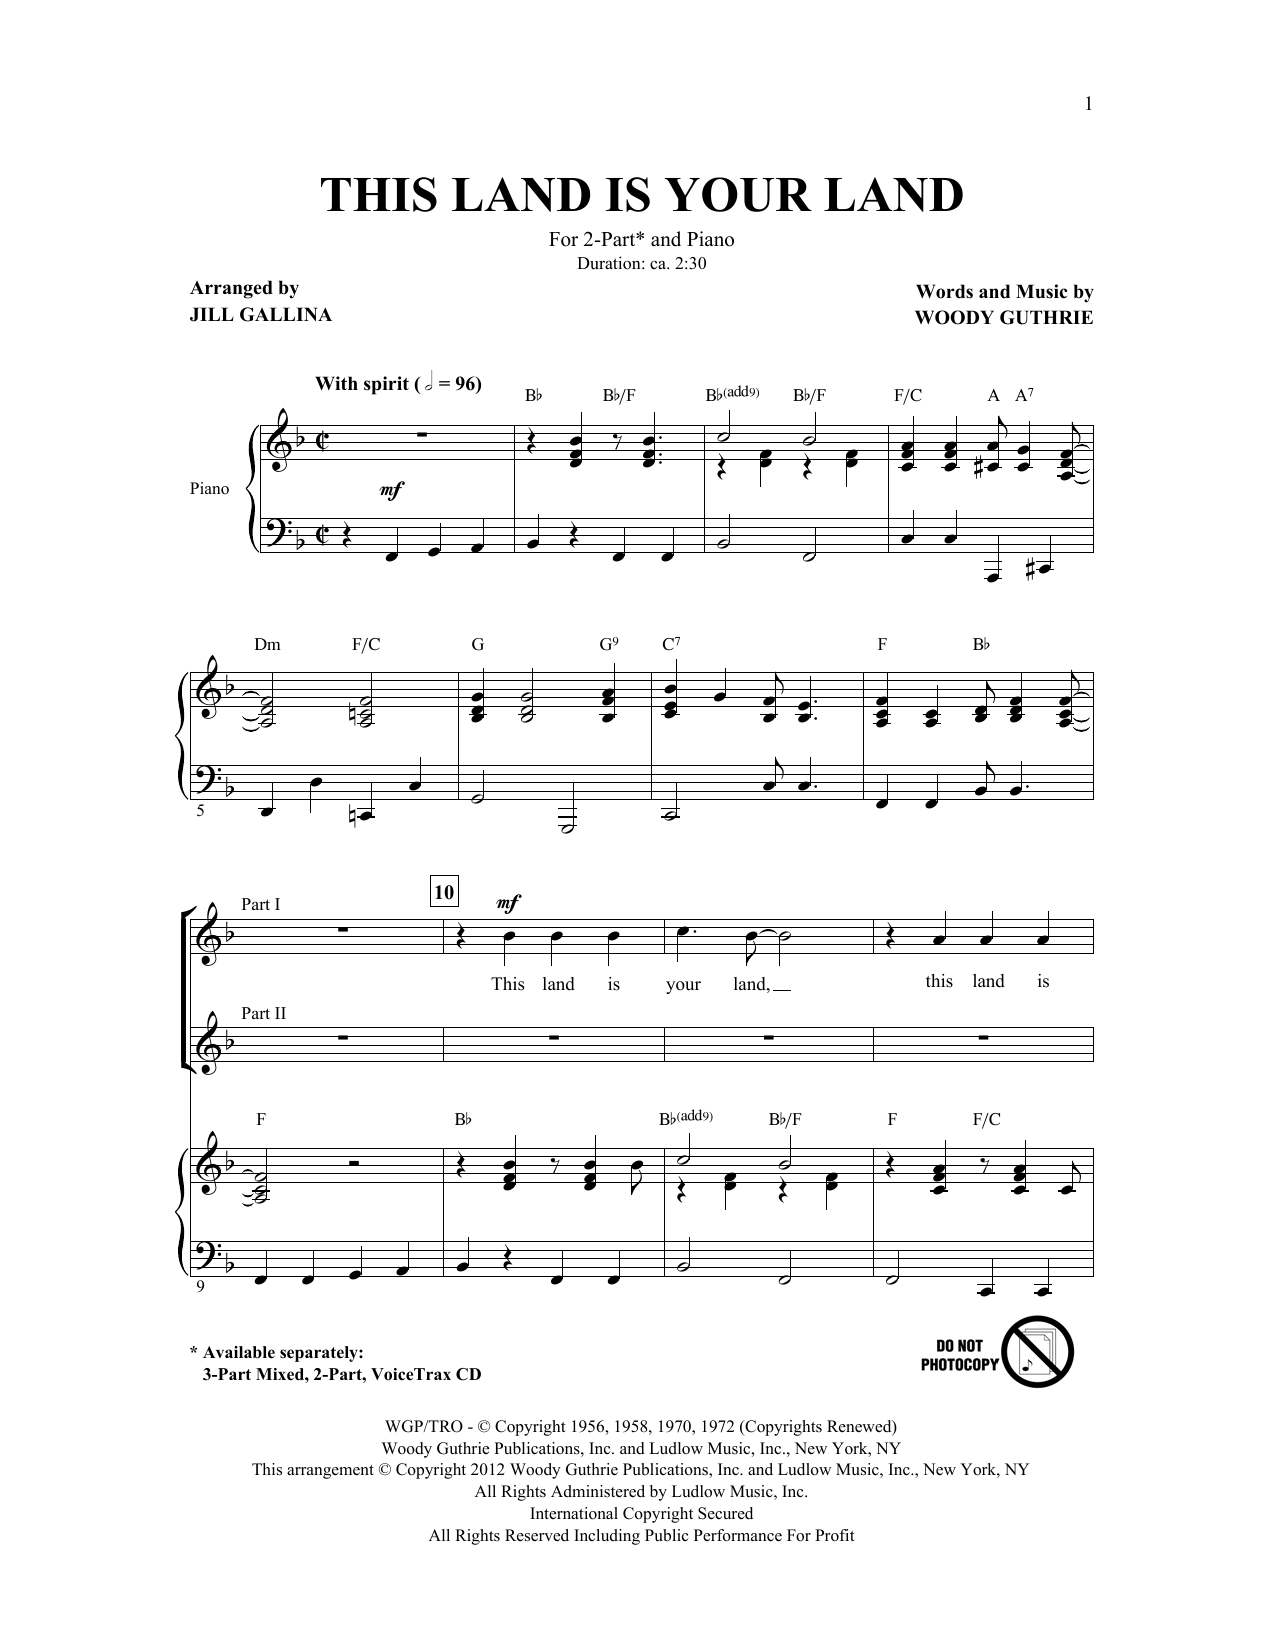 Download Woody Guthrie This Land Is Your Land (arr. Jill Galli Sheet Music